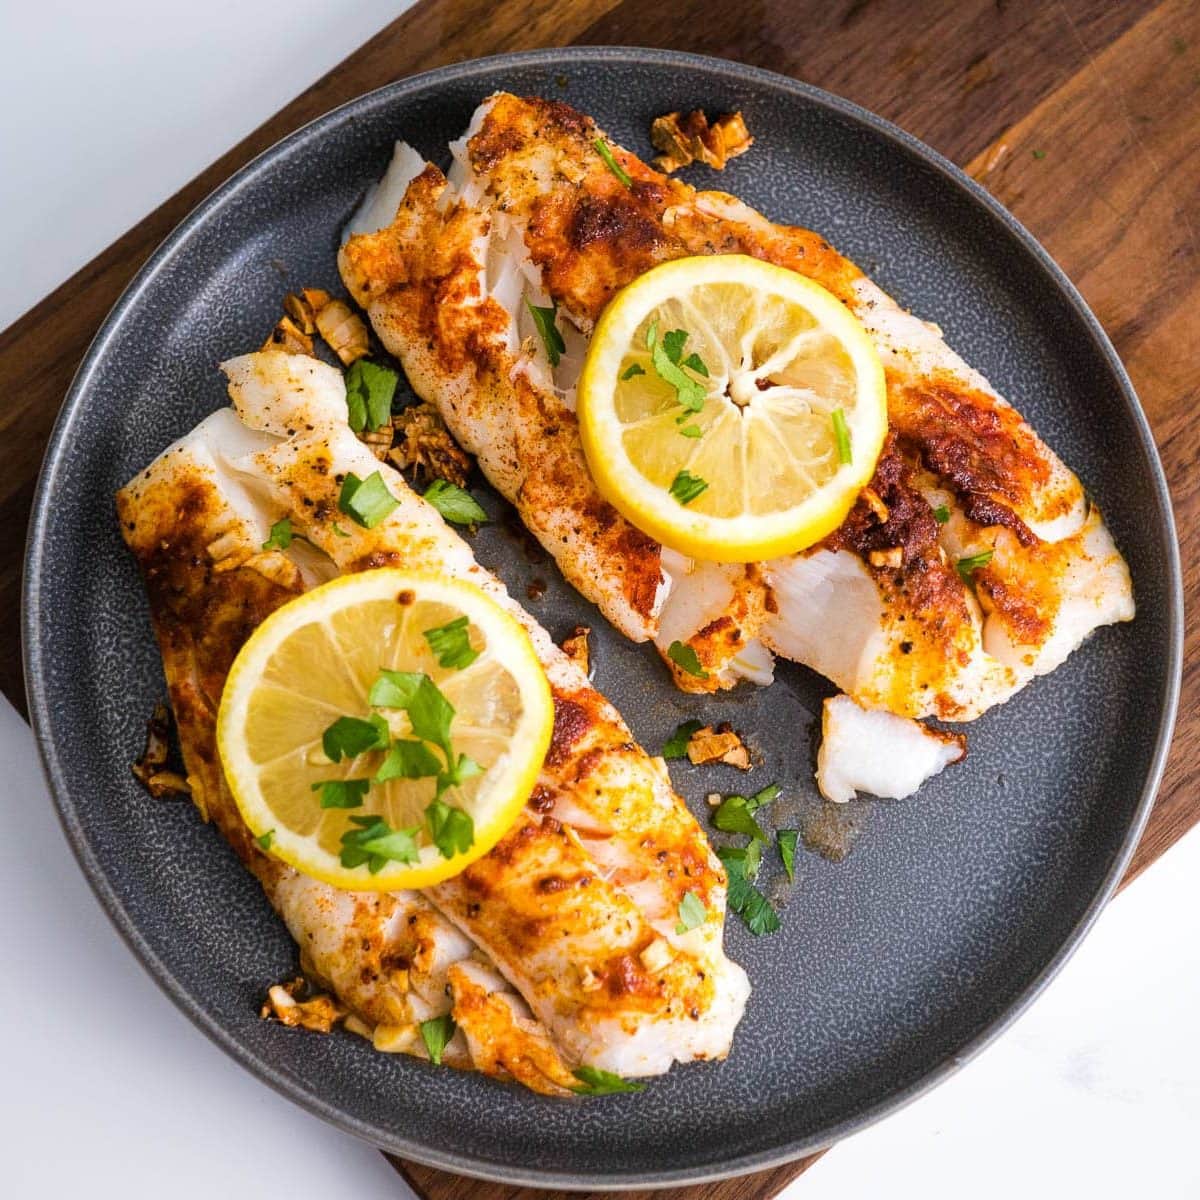 Air fryer cod fillets without breading topped with lemon and herbs.